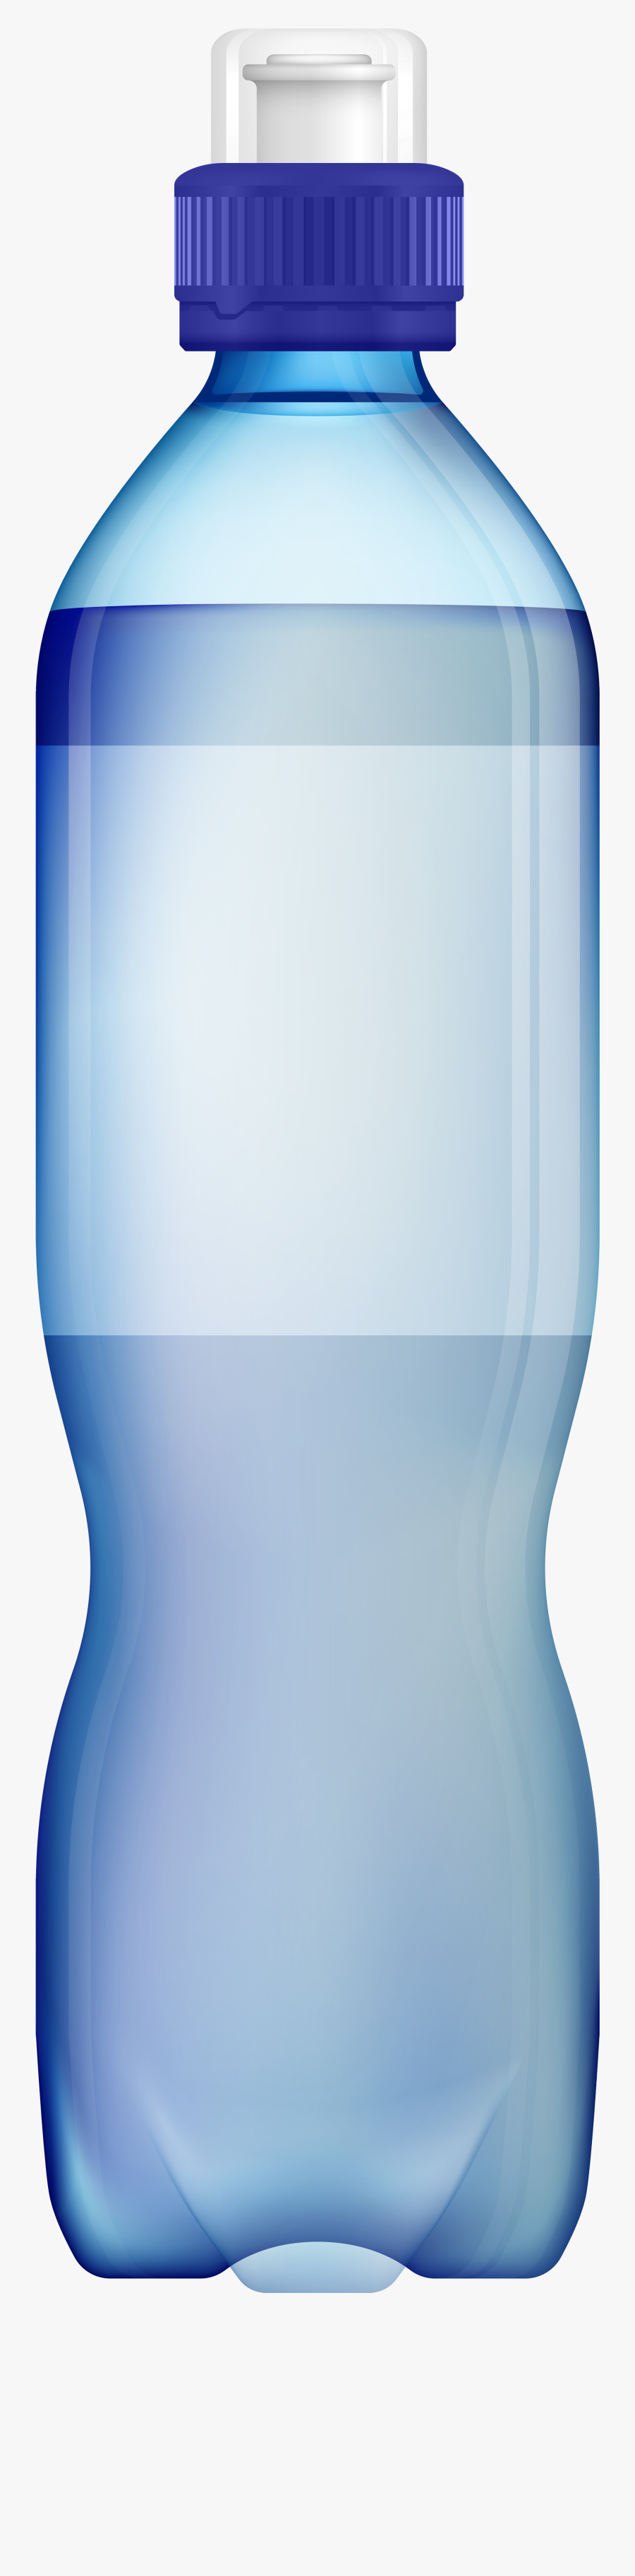 Transparent Water On Glass Png, Transparent Clipart